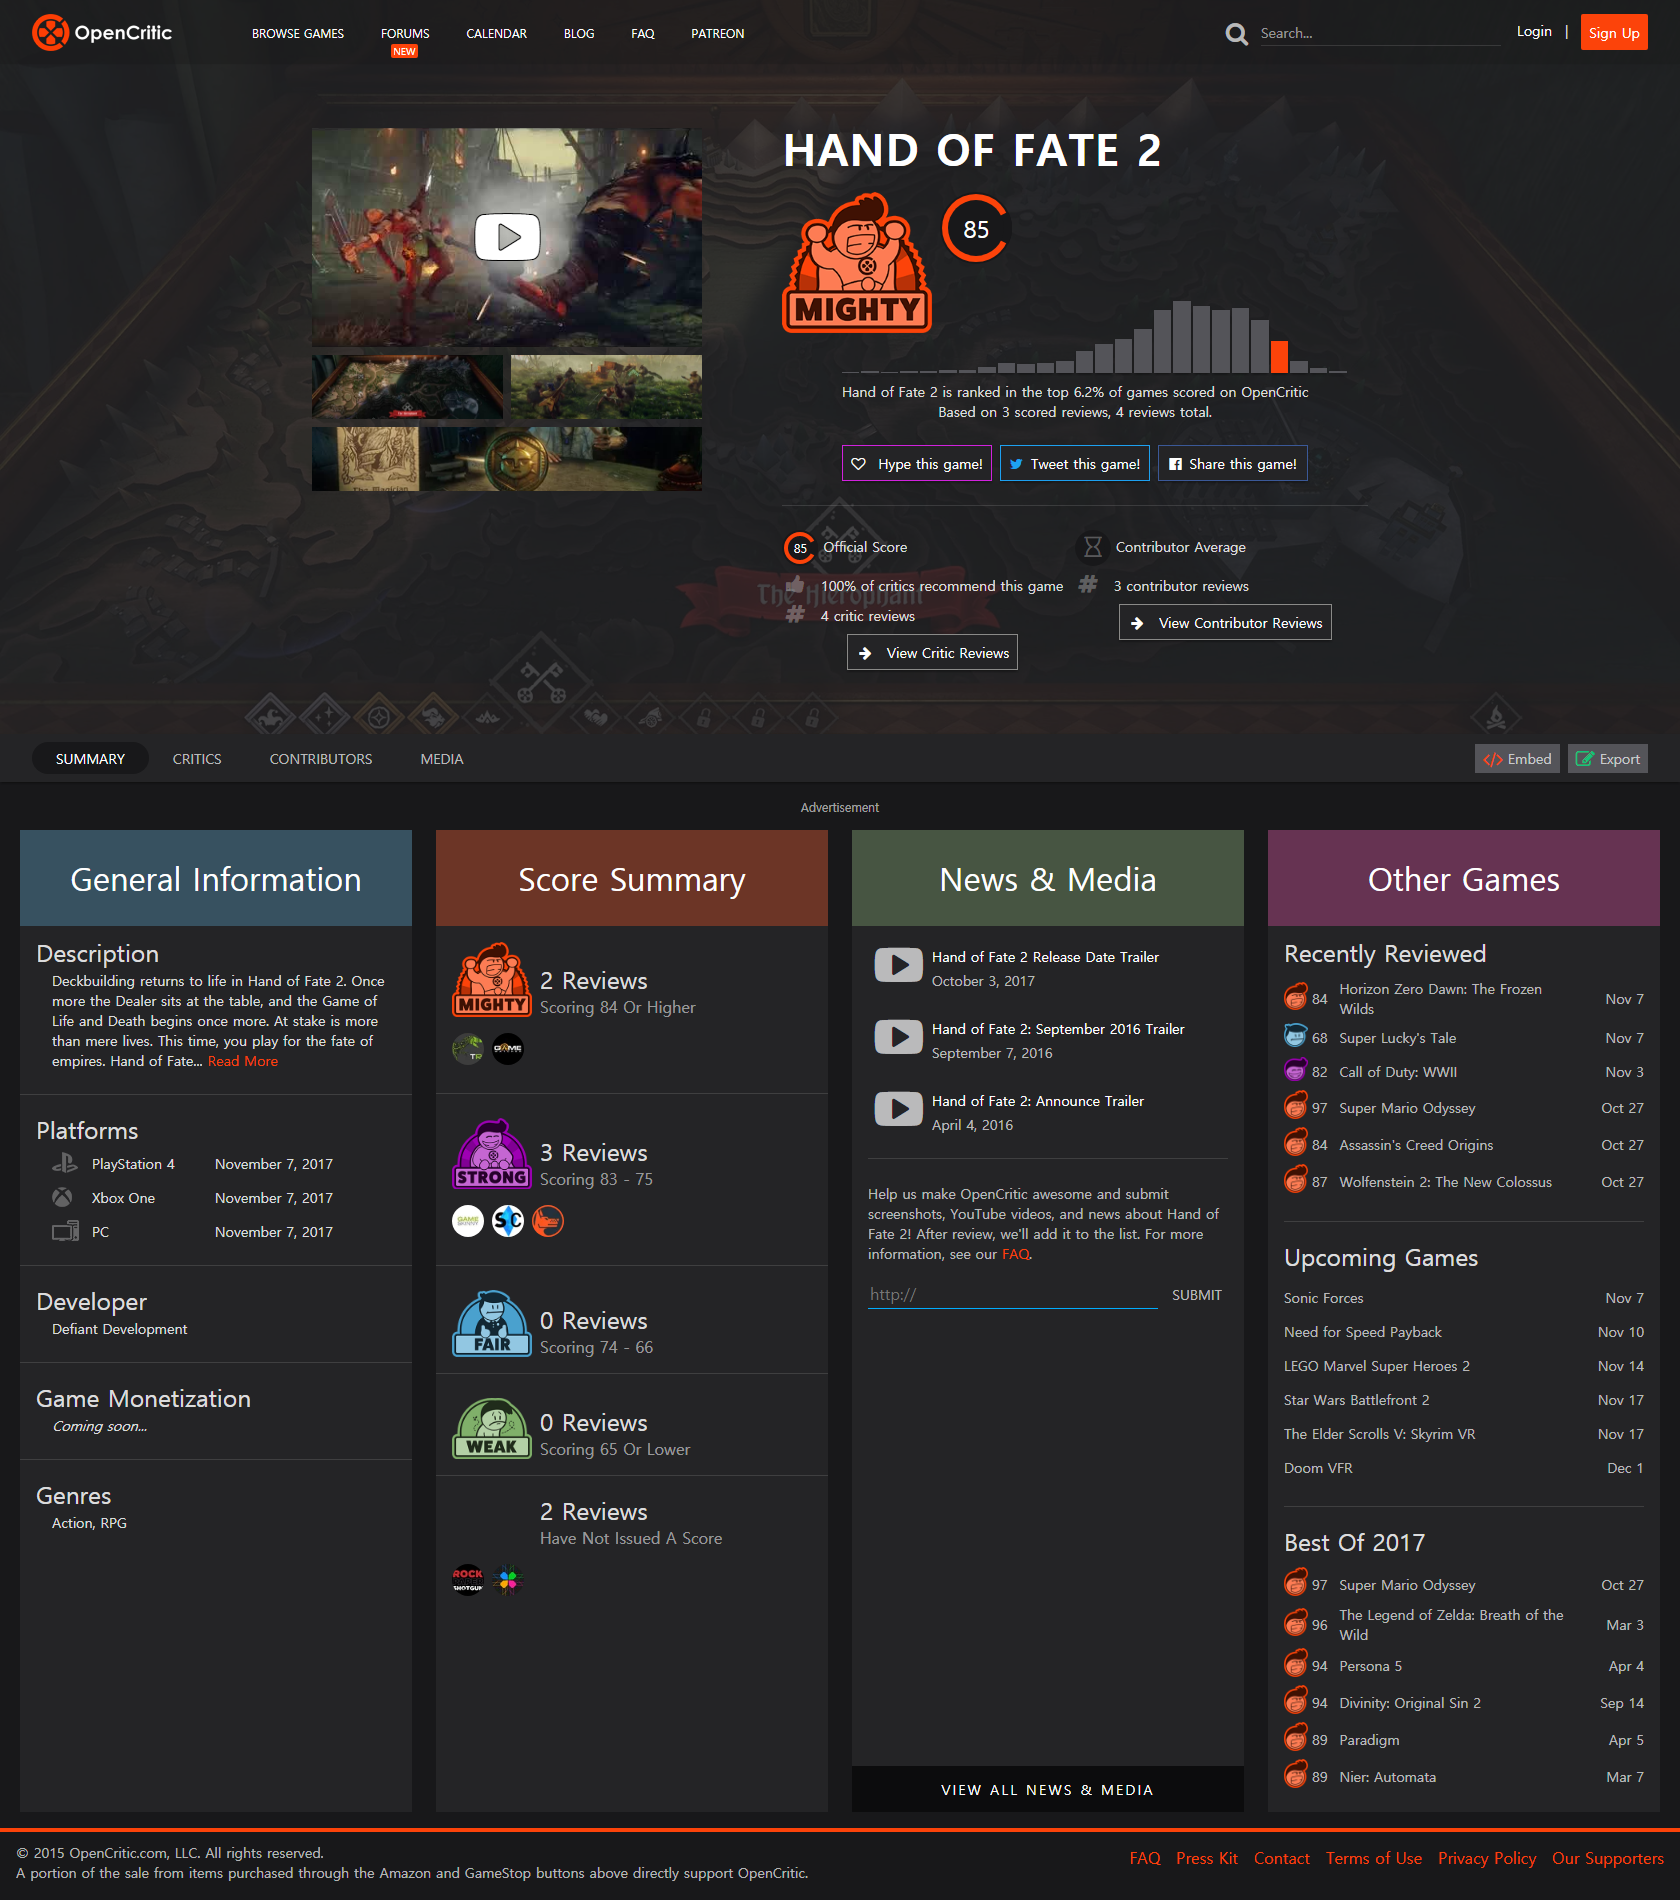 screencapture-opencritic-game-5117-hand-of-fate-2-1510008357156 (1).png